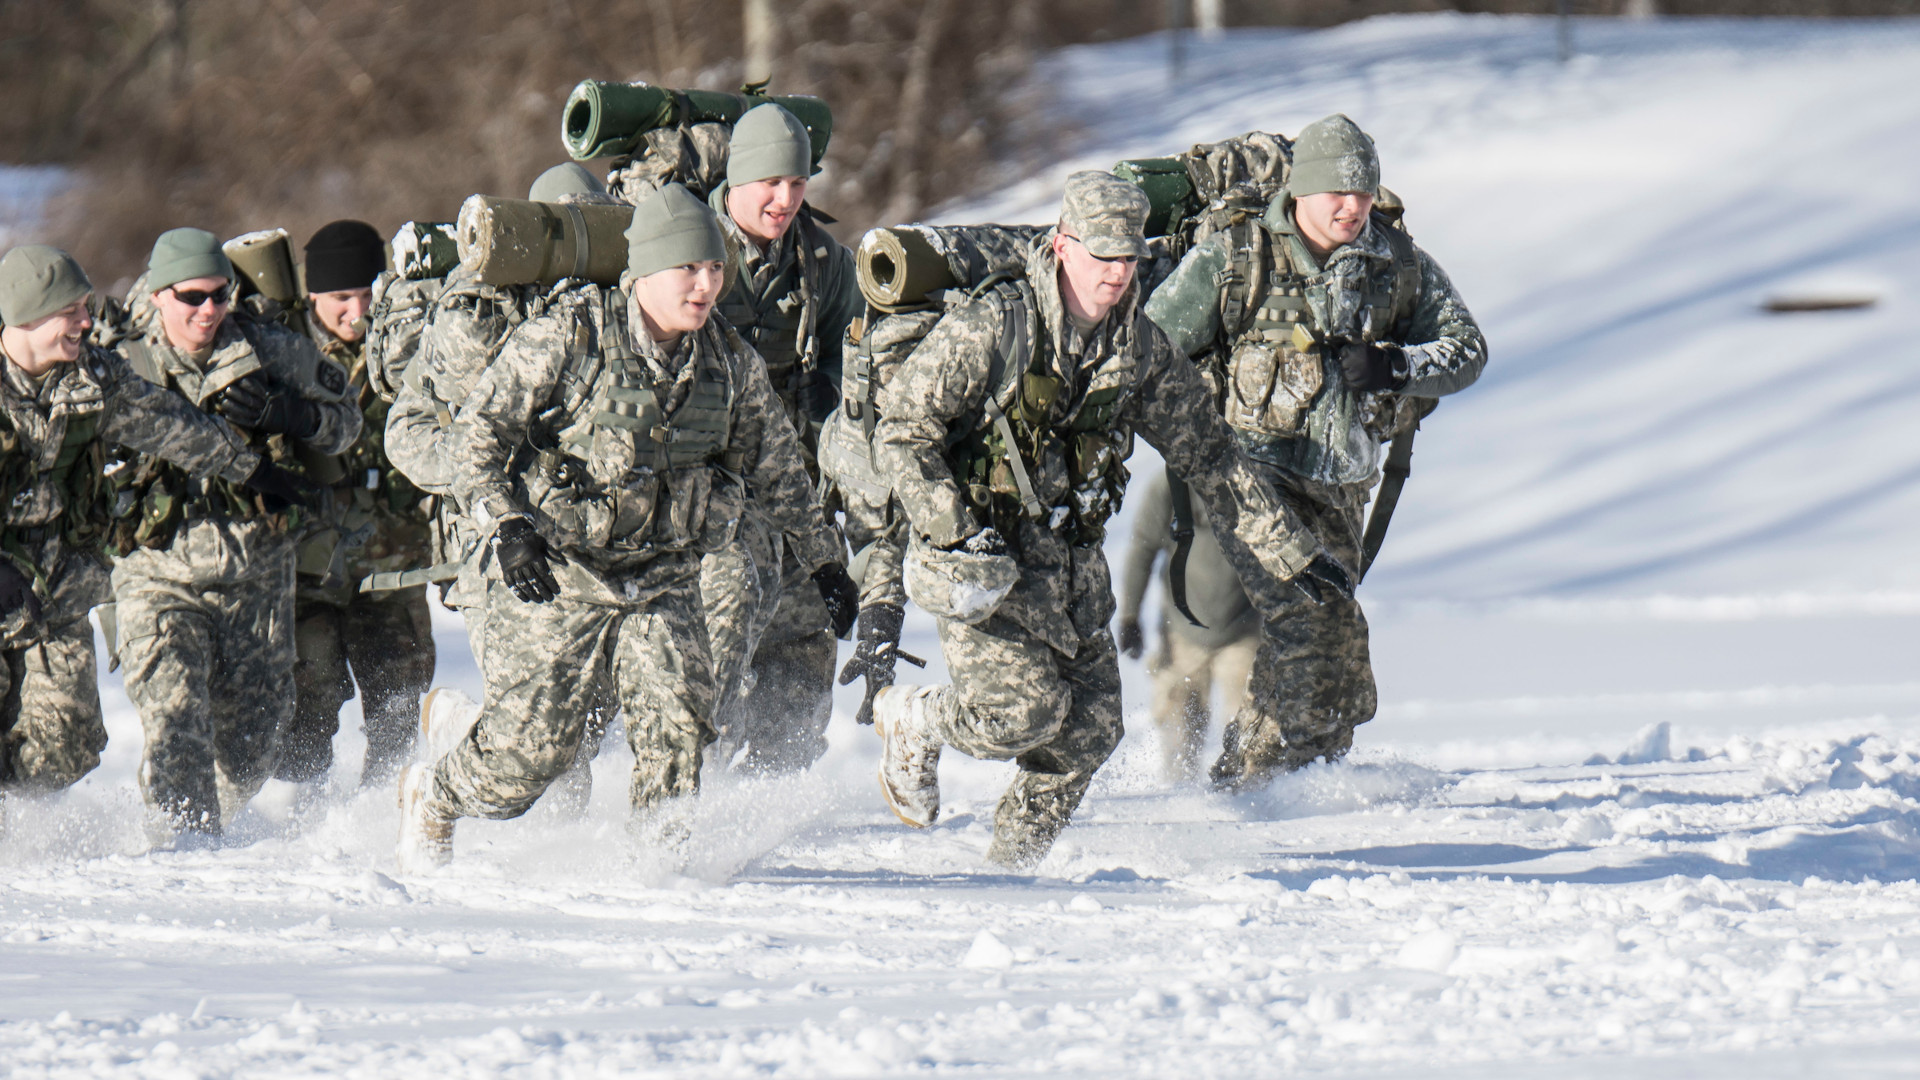 ACU, MilLab, cadets, cold weather, corps, formation, snow, soldier, training, winter;